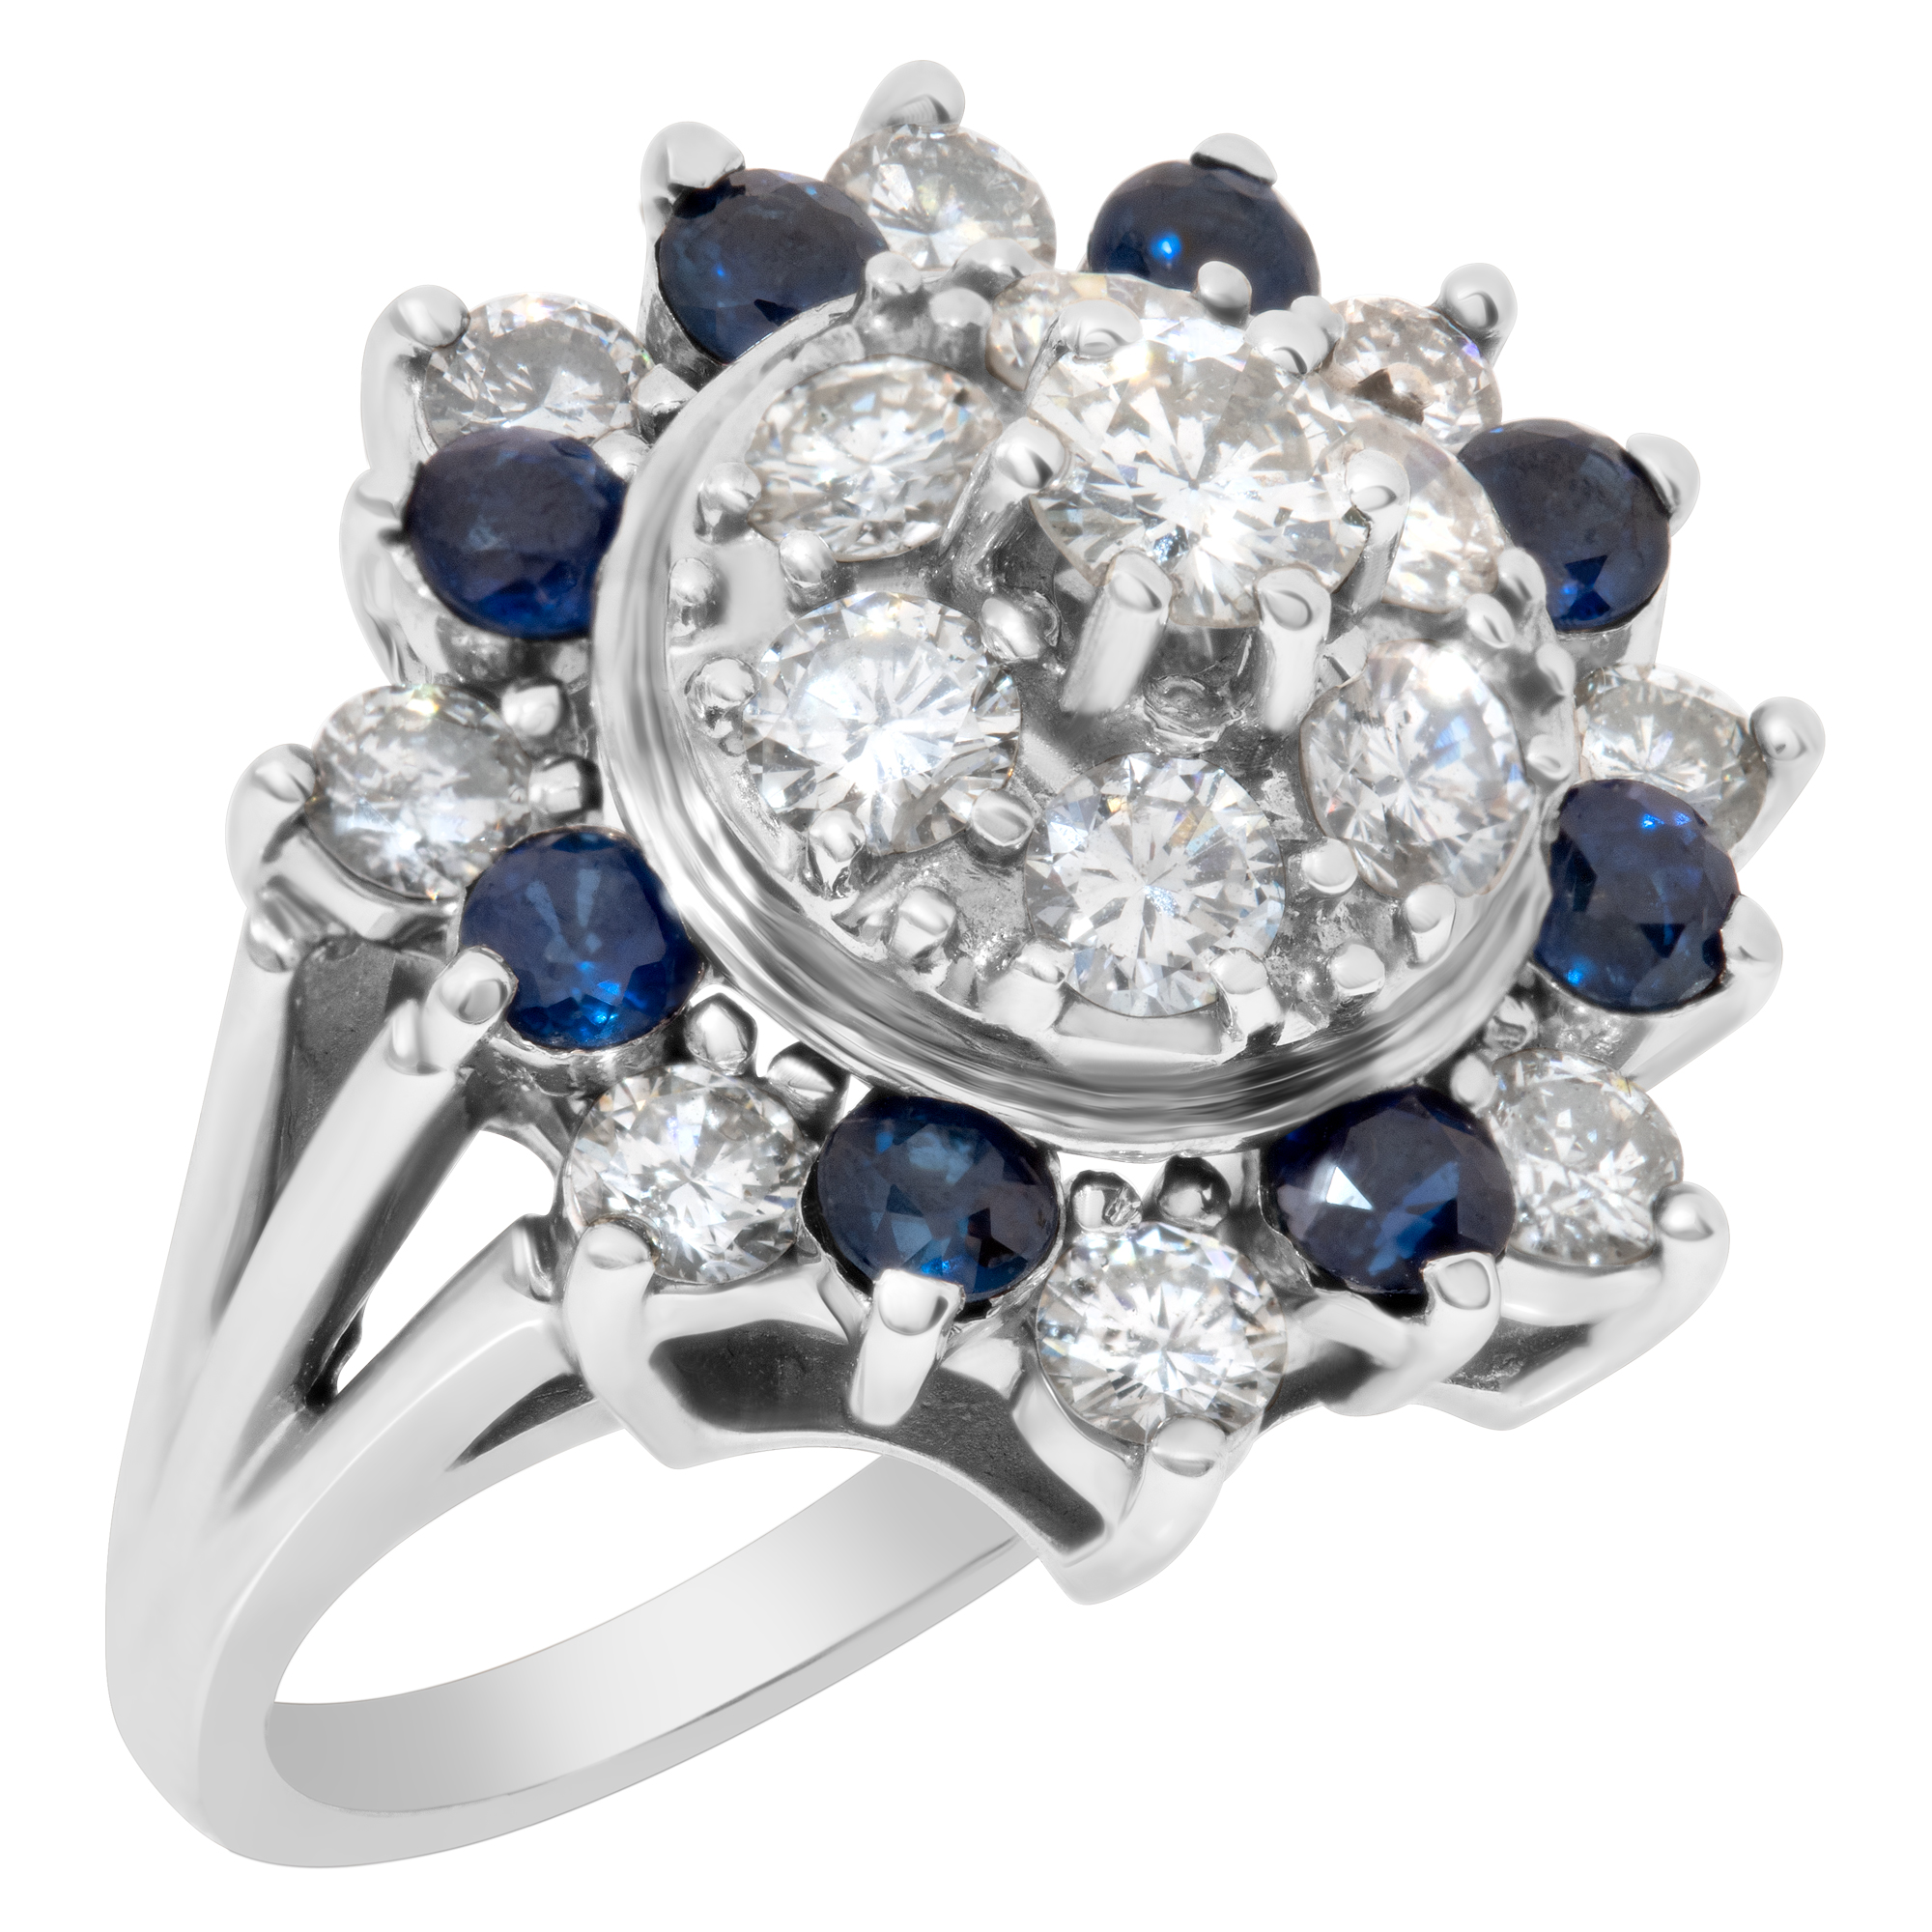 Vintage diamonds and sapphire ring set in 14K white gold. Round brilliant cut diamonds total approx weight over 2.00 carats. image 3